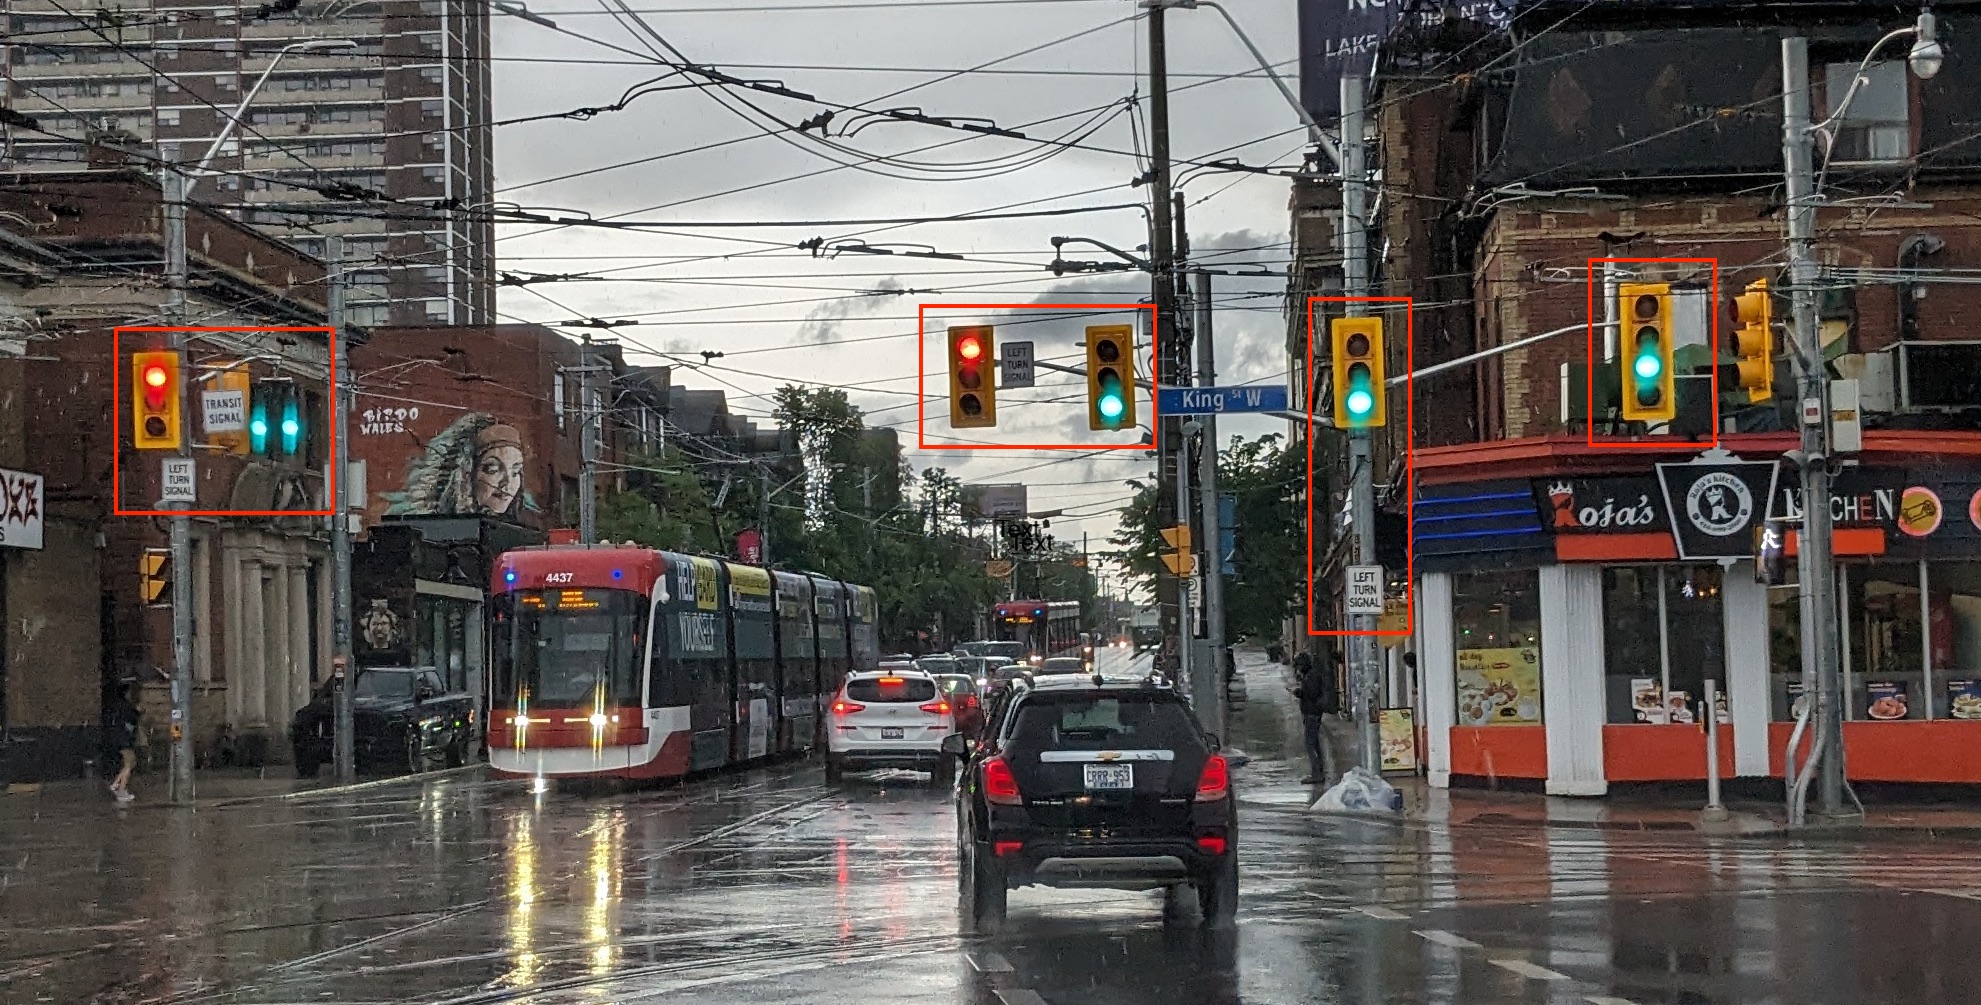 Traffic lights at King, Queen, Queensway, and Roncesvalles